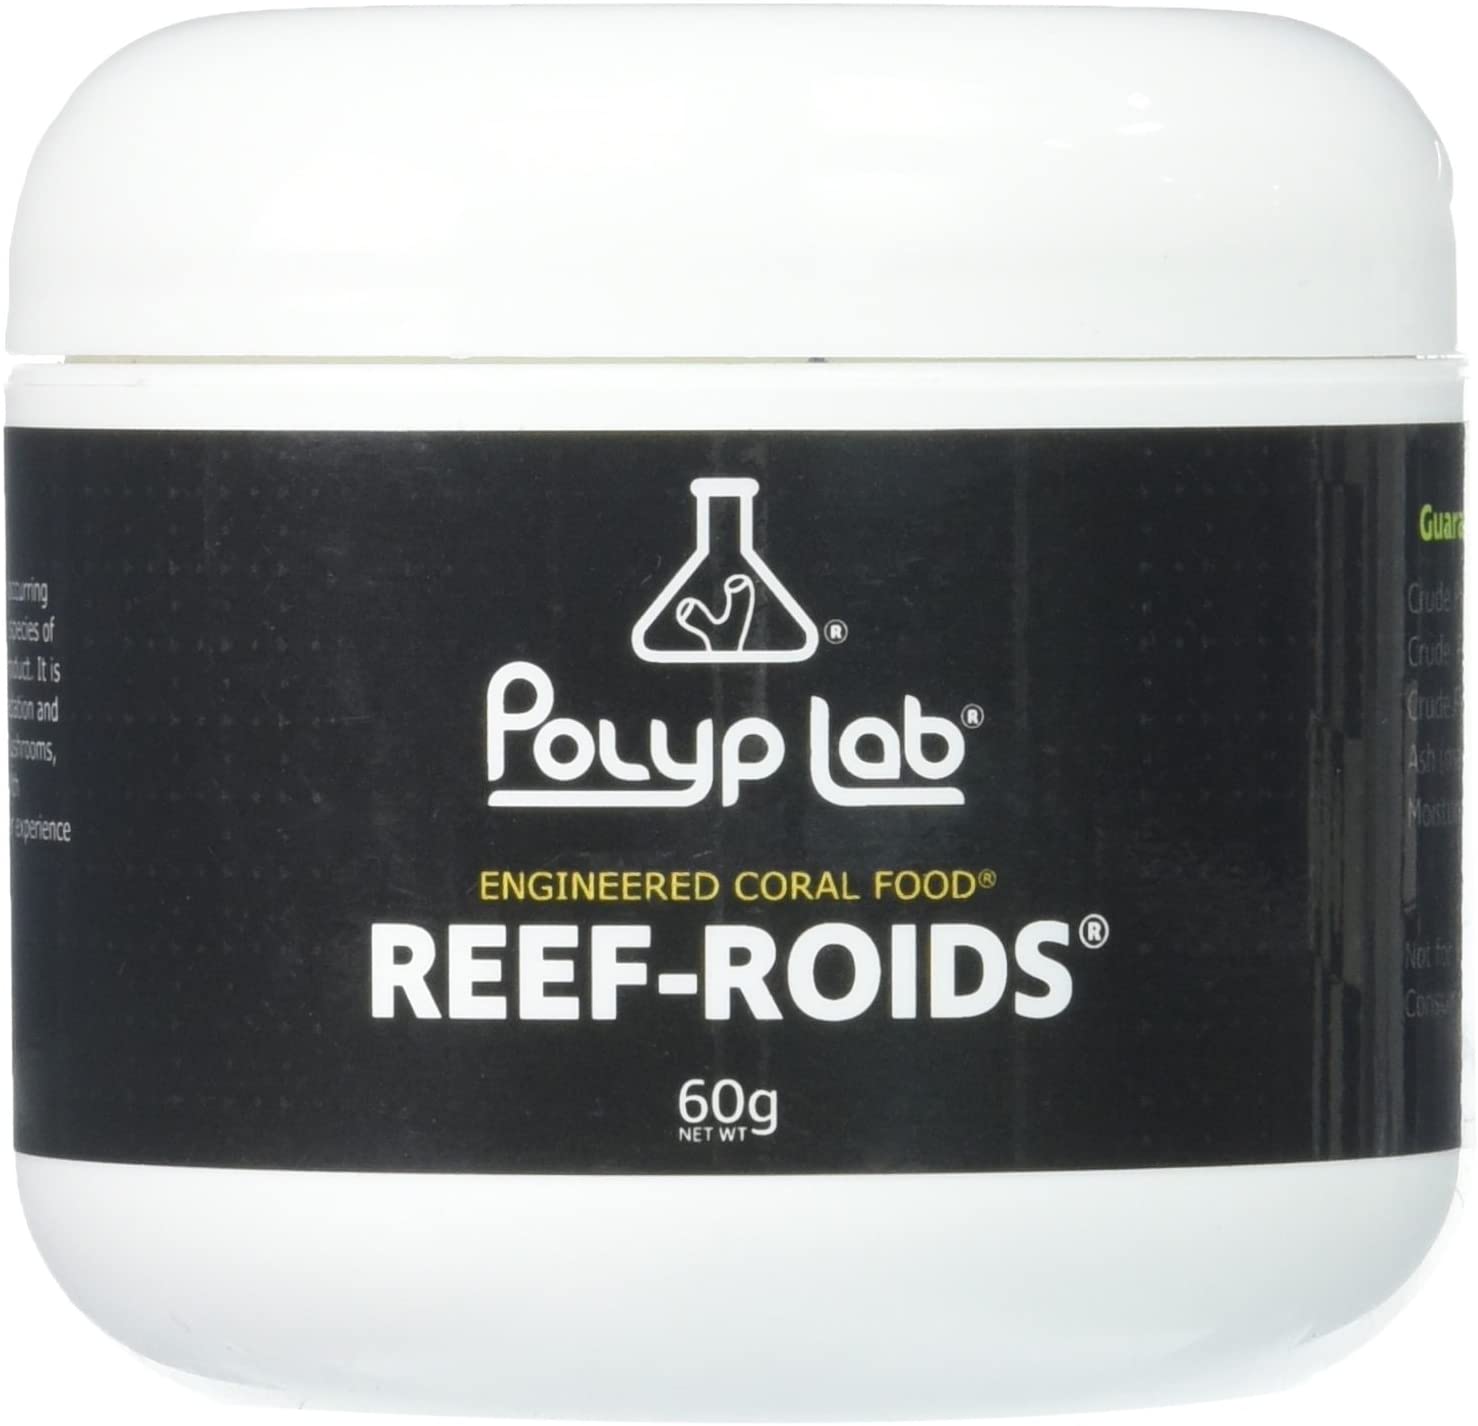 POLYPLAB - Reef-Roids